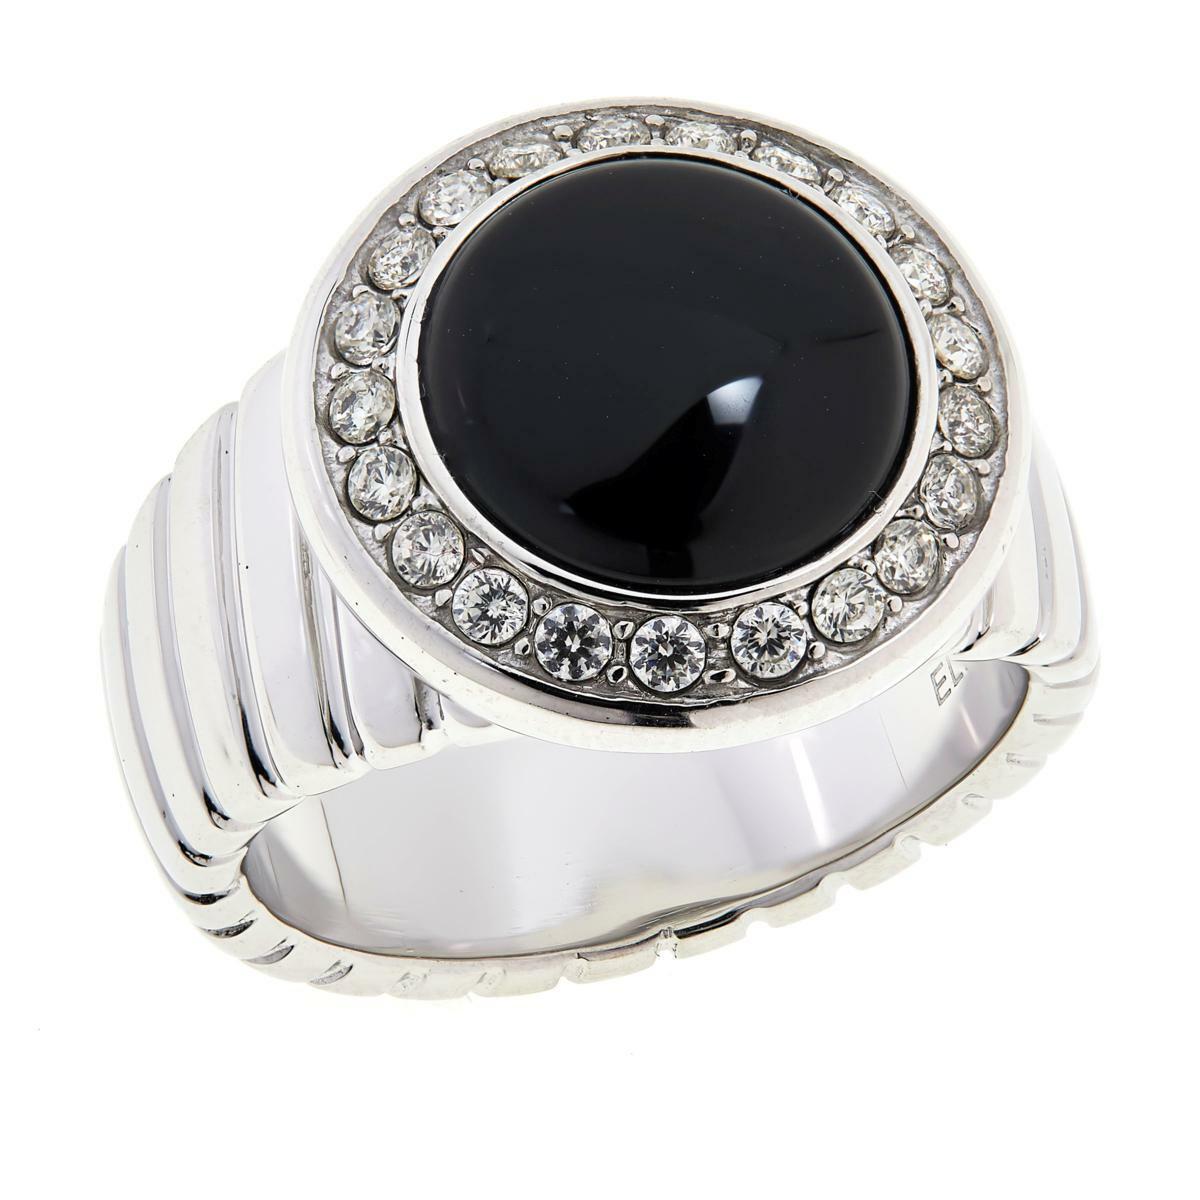 Colleen Lopez Black Cabochon and White Topaz Ring, Size 8